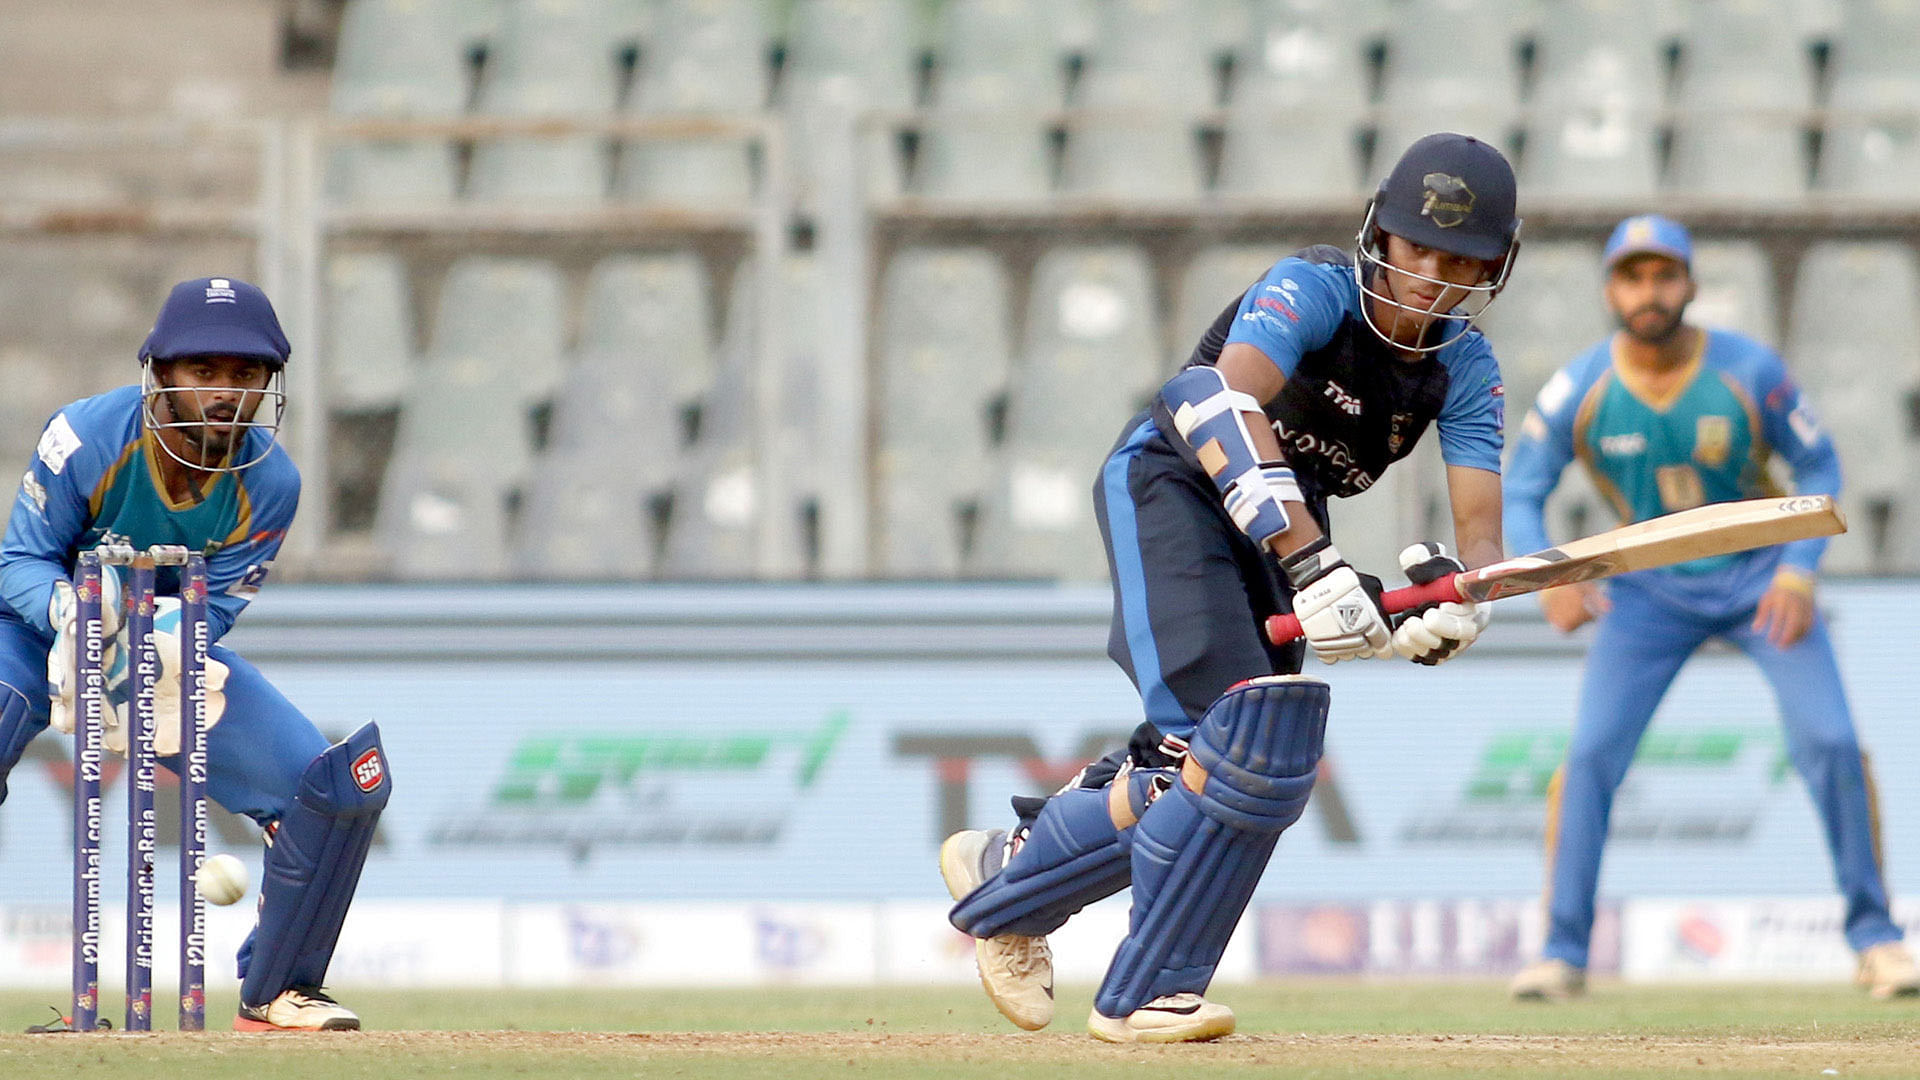 Jaiswal practised his chops playing for the Mumbai U-16 and U-19 squads, as well as in the inaugural T20 Mumbai League.